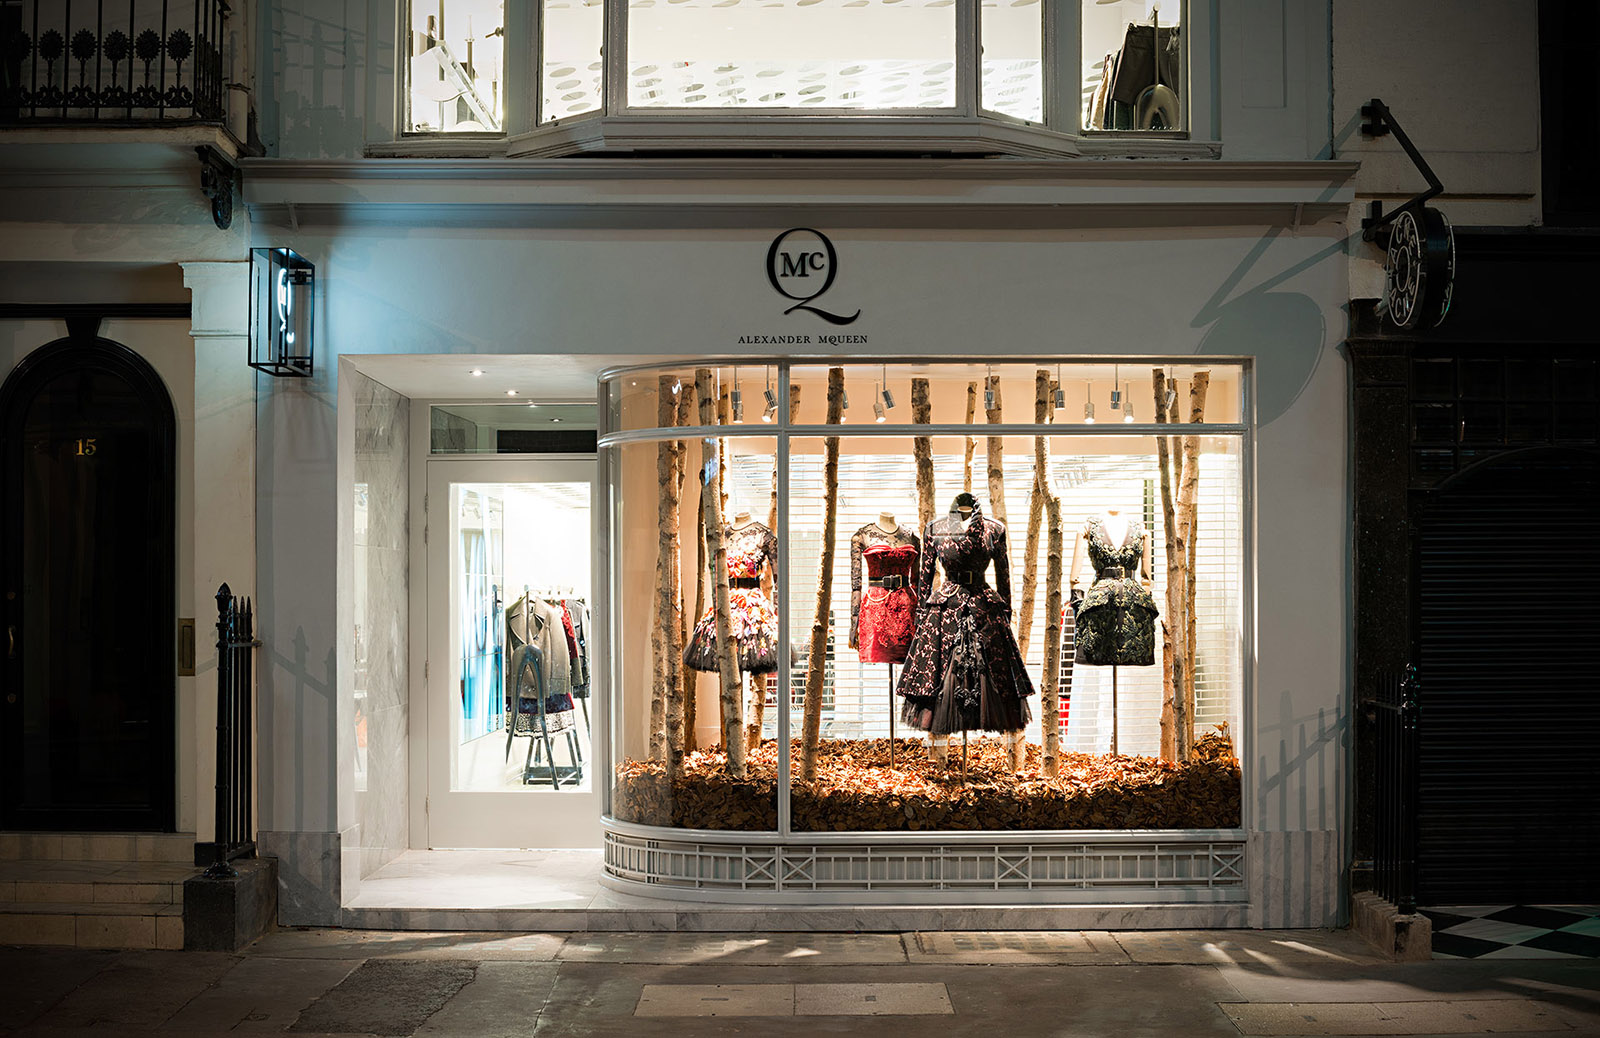 McQ by Alexander McQueen, Mayfair, London Retail Architects